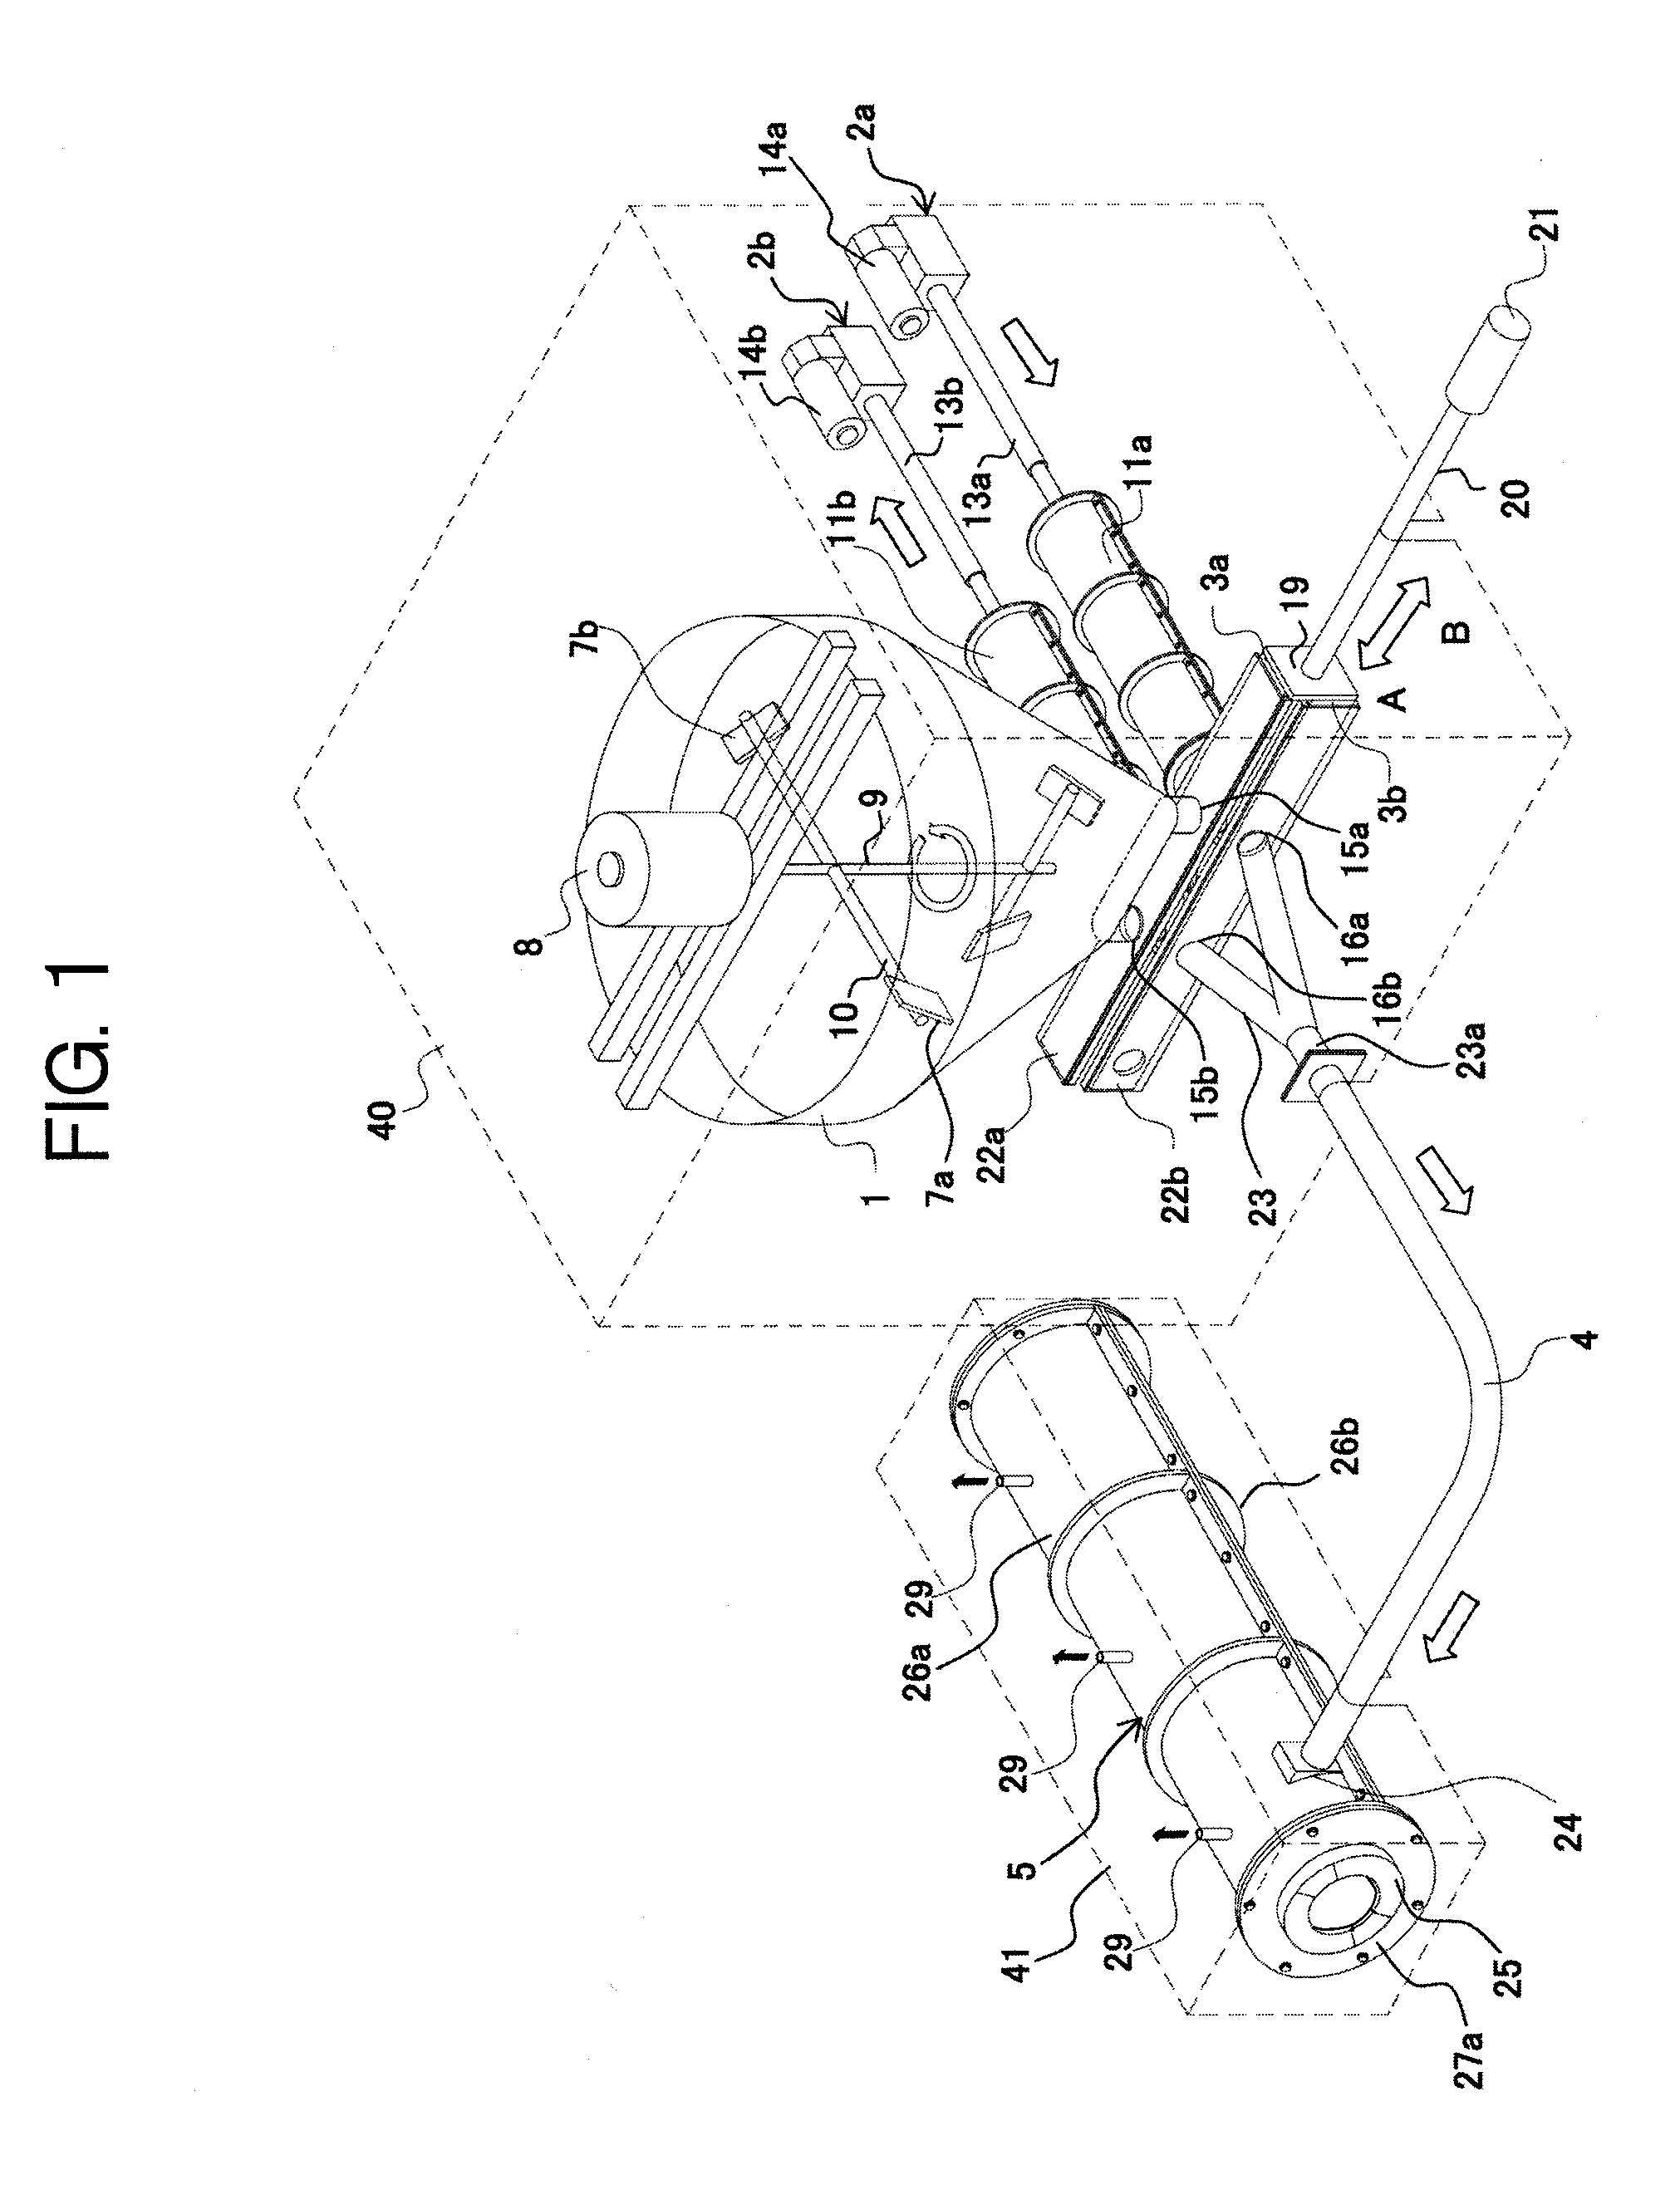 Apparatus for producing a sulfur concrete substance